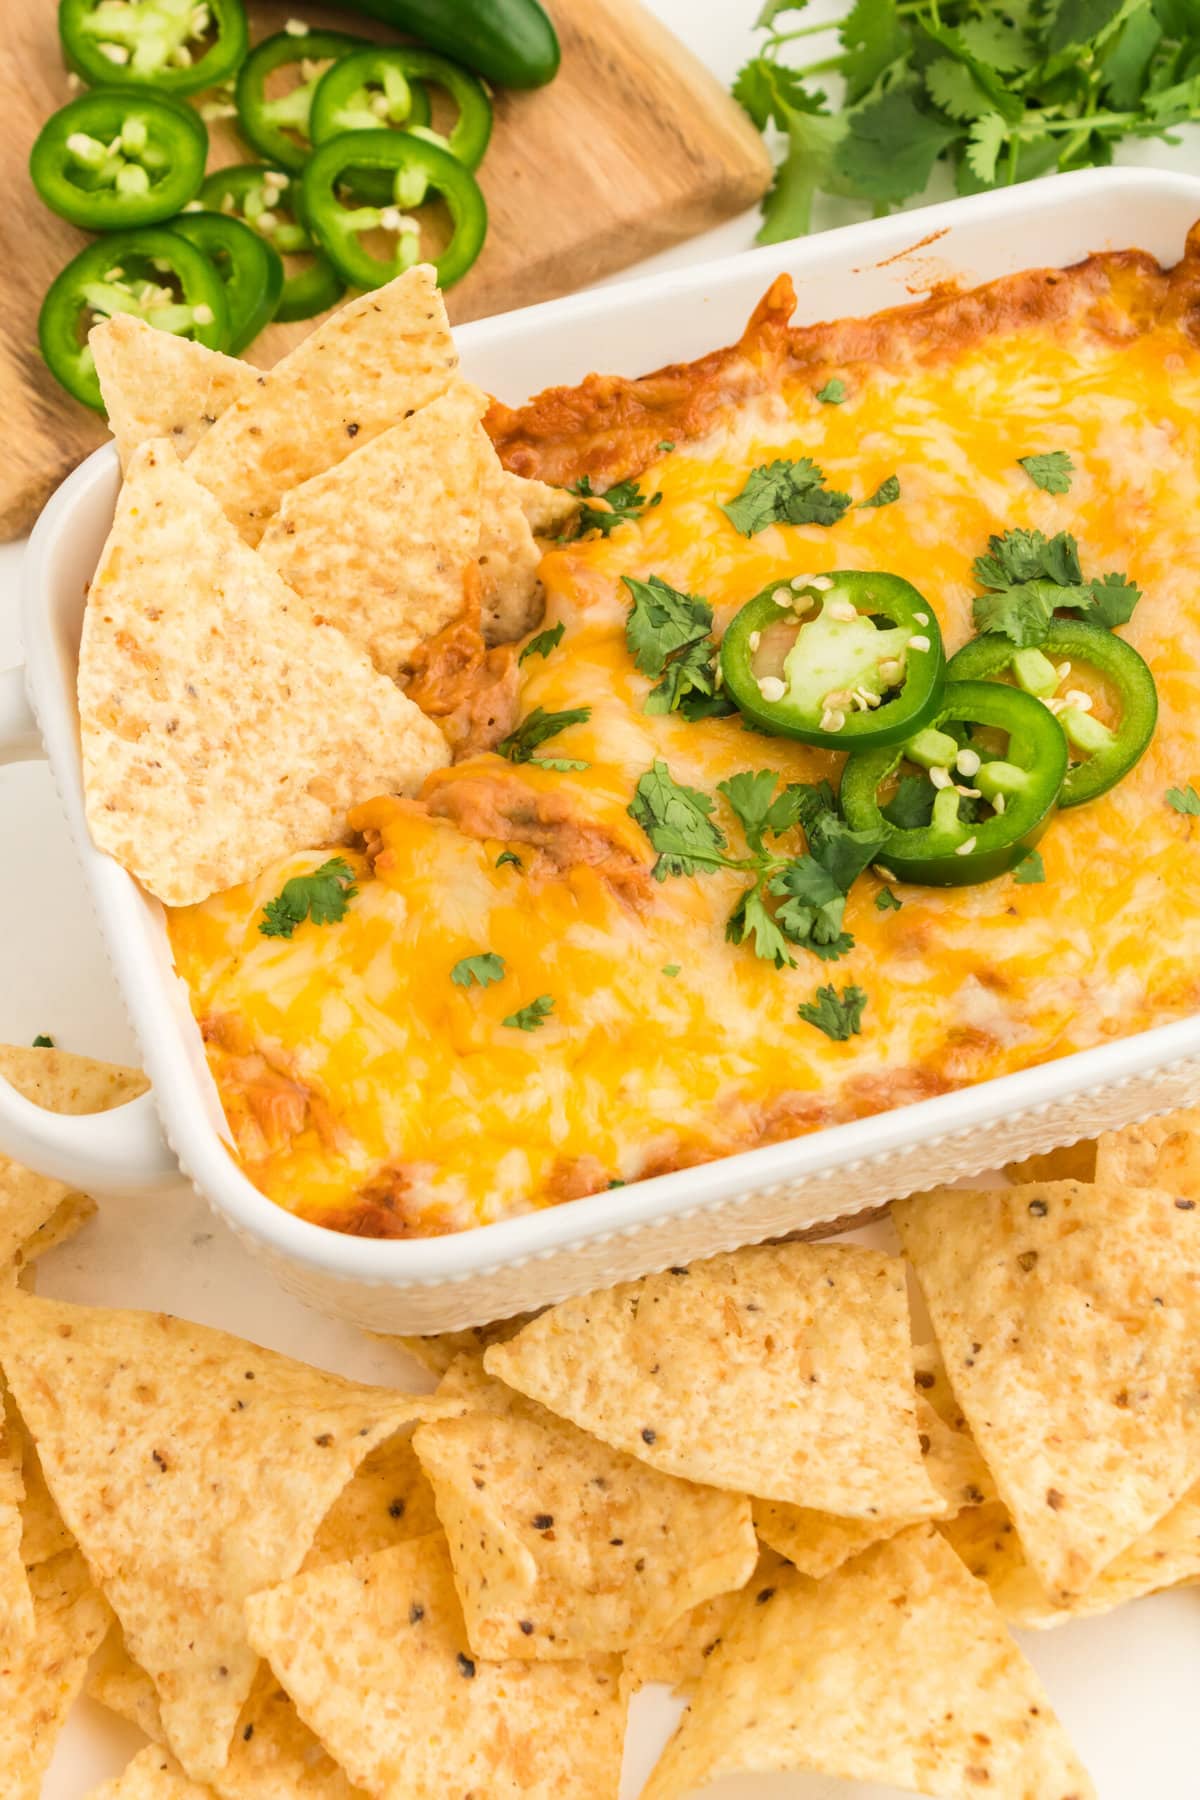 Bean Dip with tortilla chips on the side.